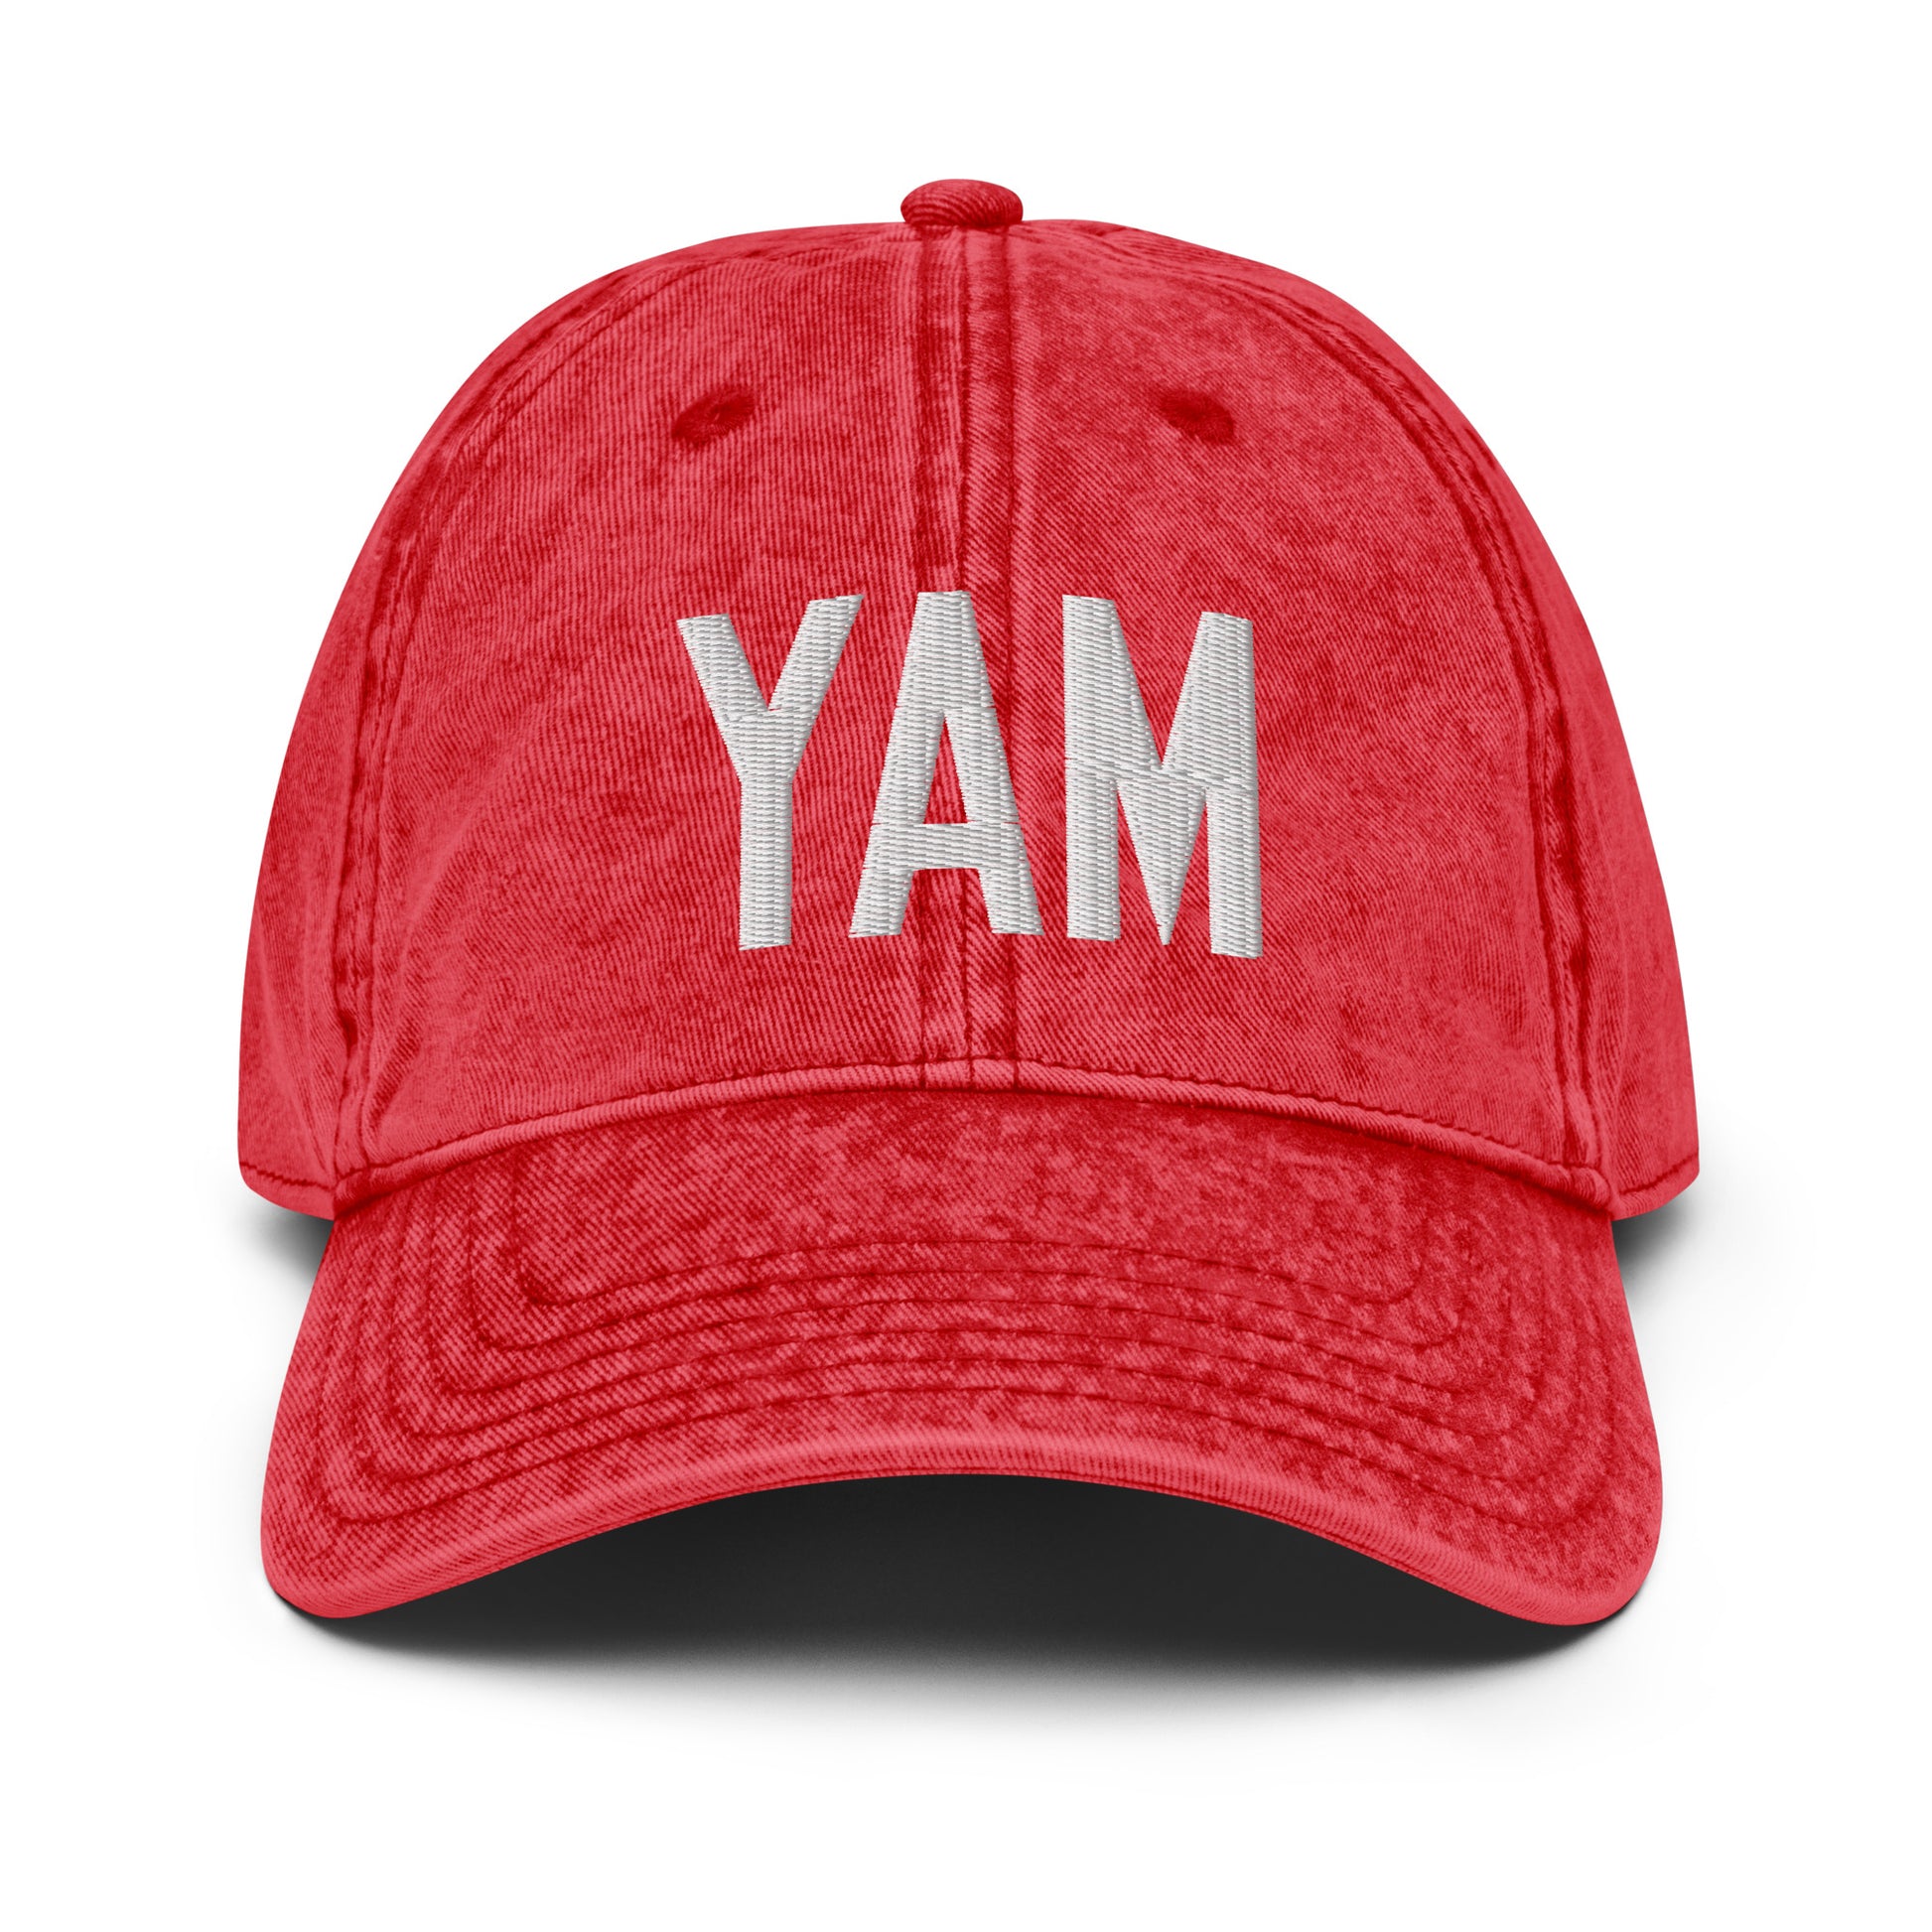 Airport Code Twill Cap - White • YAM Sault-Ste-Marie • YHM Designs - Image 22